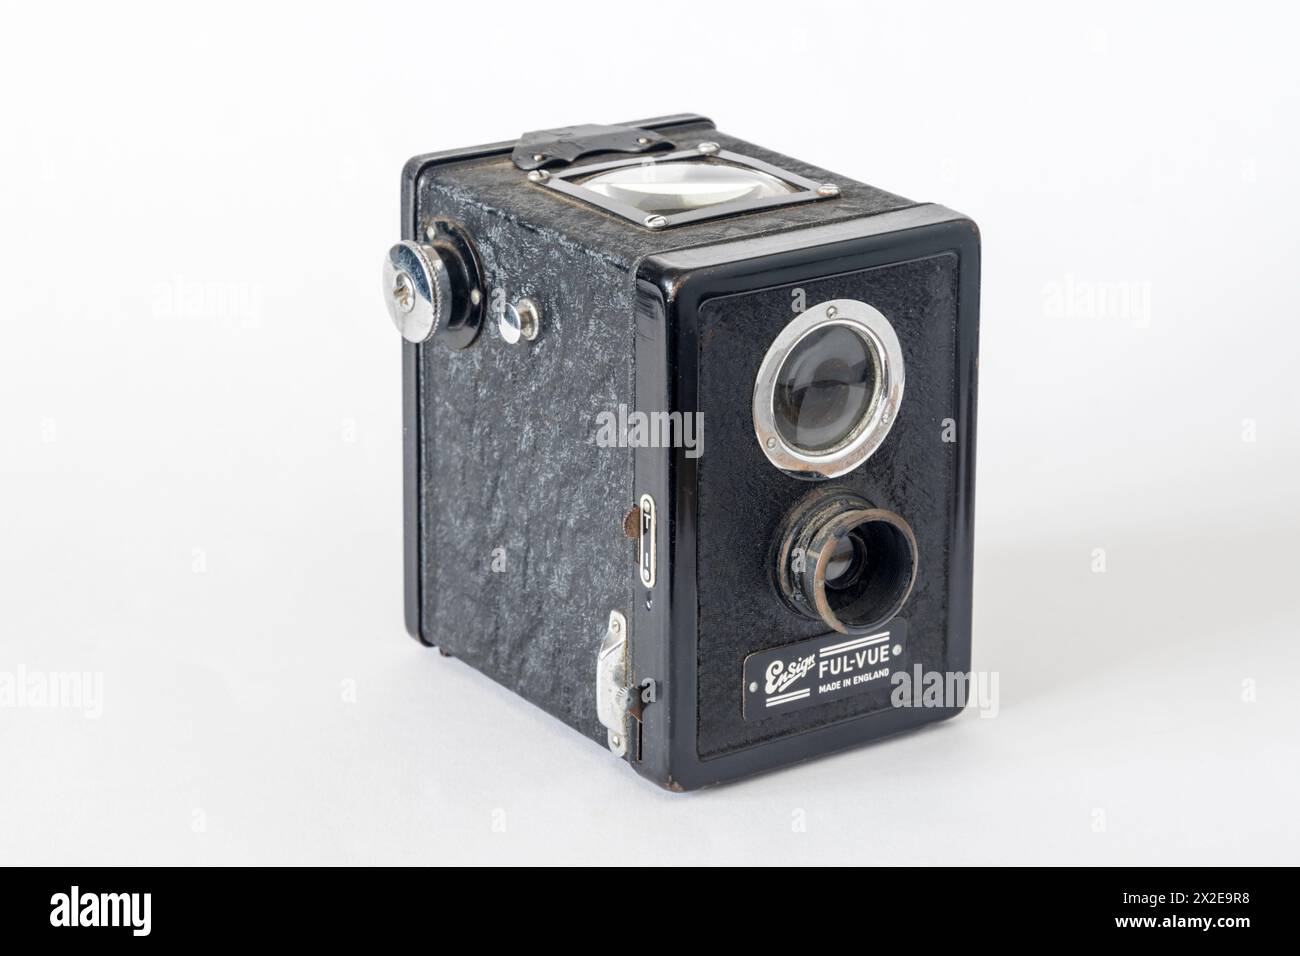 A 1930s box camera. The Ensign Ful-Vue used square 6 x 6 cm rollfilm. Stock Photo